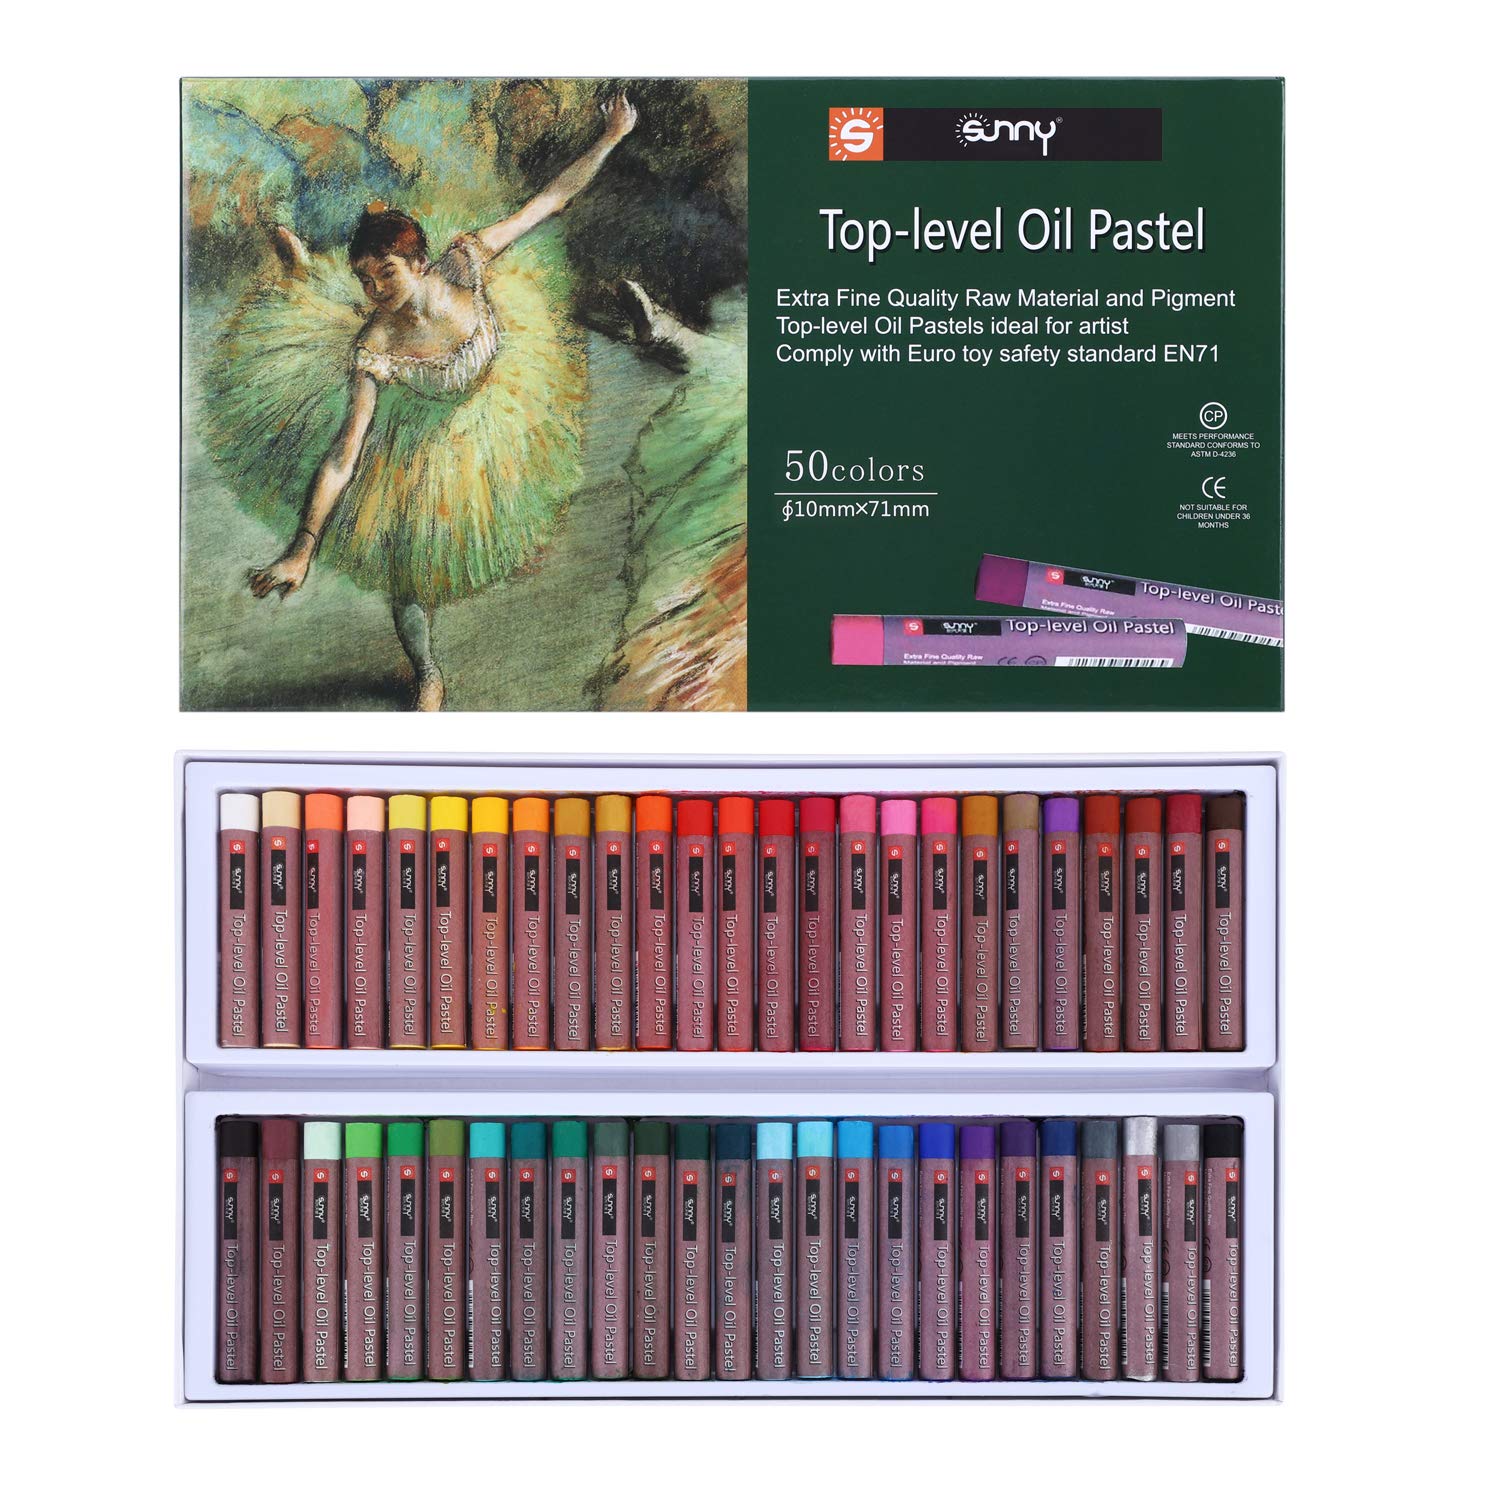  Artecho Neon Oil Pastels Set of 12 Colors (10x70mm), Soft Oil  Pastels for Art Painting, Drawing, Blending, Oil Crayons Pastels Art  Supplies for Artists, Beginners, Students, Teachers : Arts, Crafts